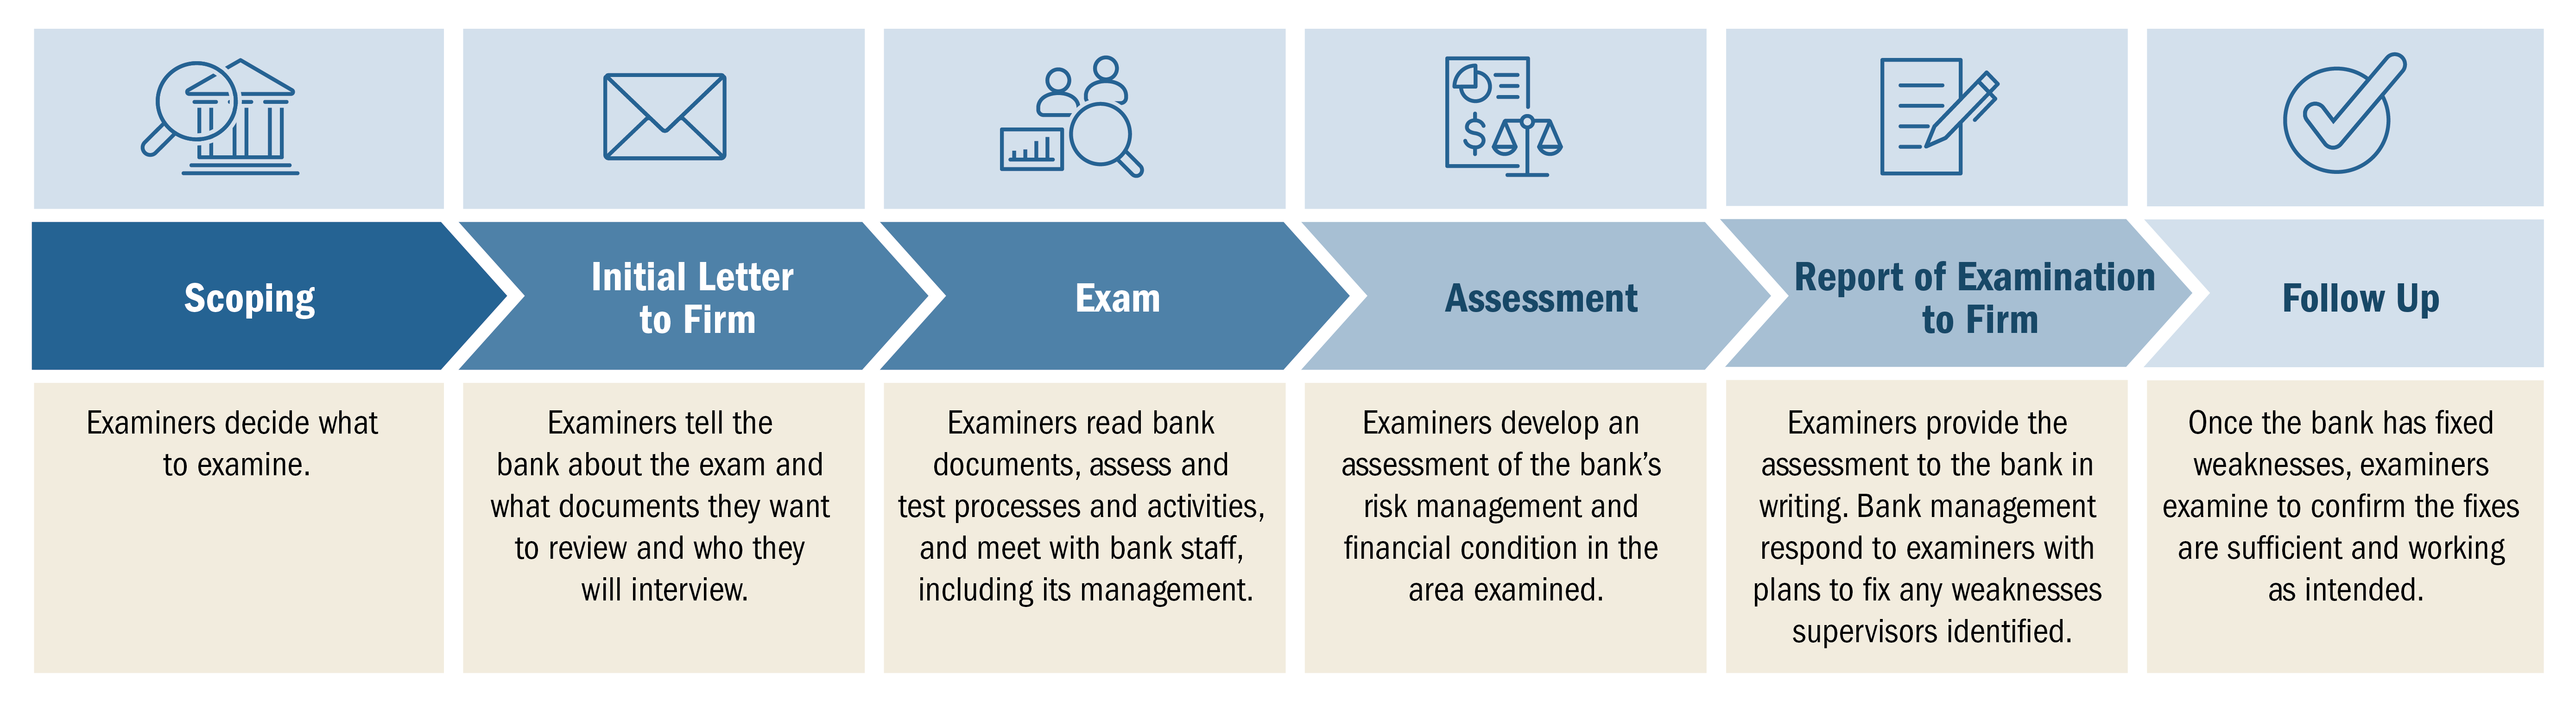 Flowchart titled “Figure 1. What happens in a bank examination?” There are six boxes. The first box is Scoping, examiners decide what to examine. An arrow leads to the next box Initial Letter to Firm, examiners tell the bank about the exam and what documents they want to review and who they will interview. An arrow leads to the next box Exam, examiners read bank documents, assess and test processes and activities, and meet with bank staff, including its management. An arrow leads to the next box Assessment, examiners develop an assessment of the bank’s risk management and financial condition in the area examined. An arrow leads to the next box Report of Examination to Firm, examiners provide the assessment to the bank in writing. Bank management respond to examiners with plans to fix any weaknesses supervisors identified. An arrow points to the final box Follow Up, once the bank has fixed weaknesses, examiners examine to confirm the fixes are sufficient and working as intended.